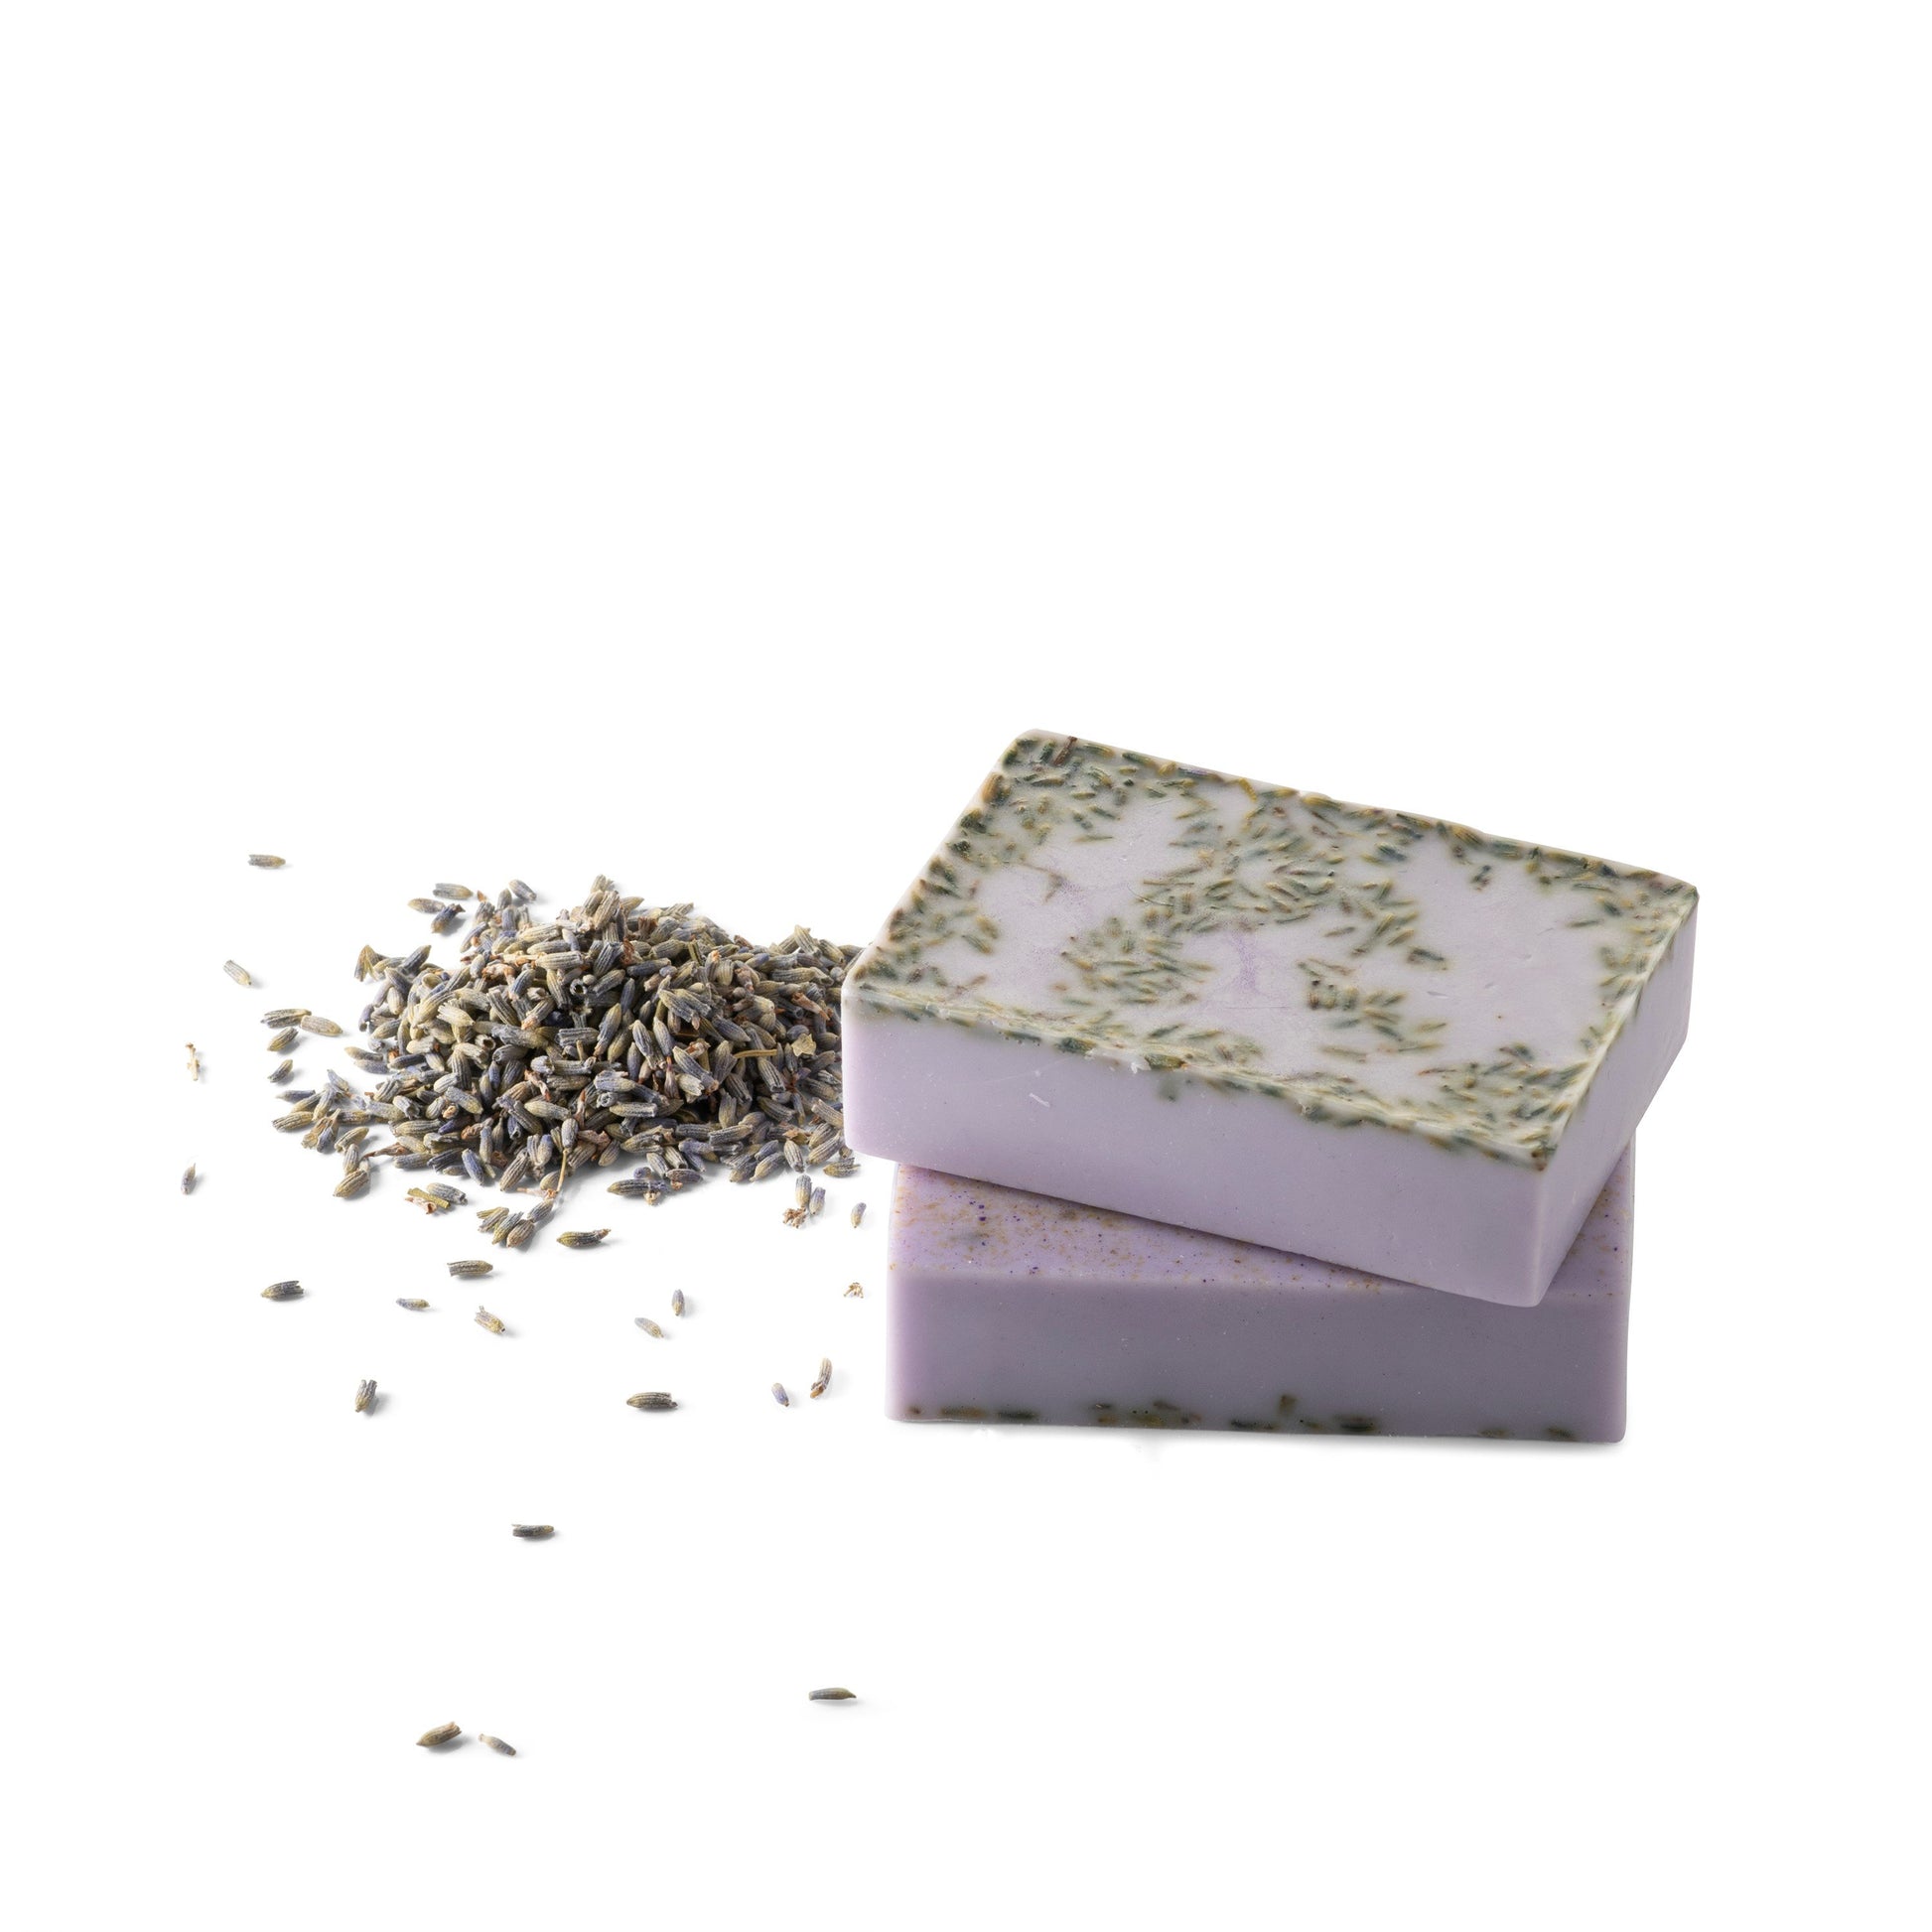 An image of the lavender body soap next to a handful of lavender grains on a white background